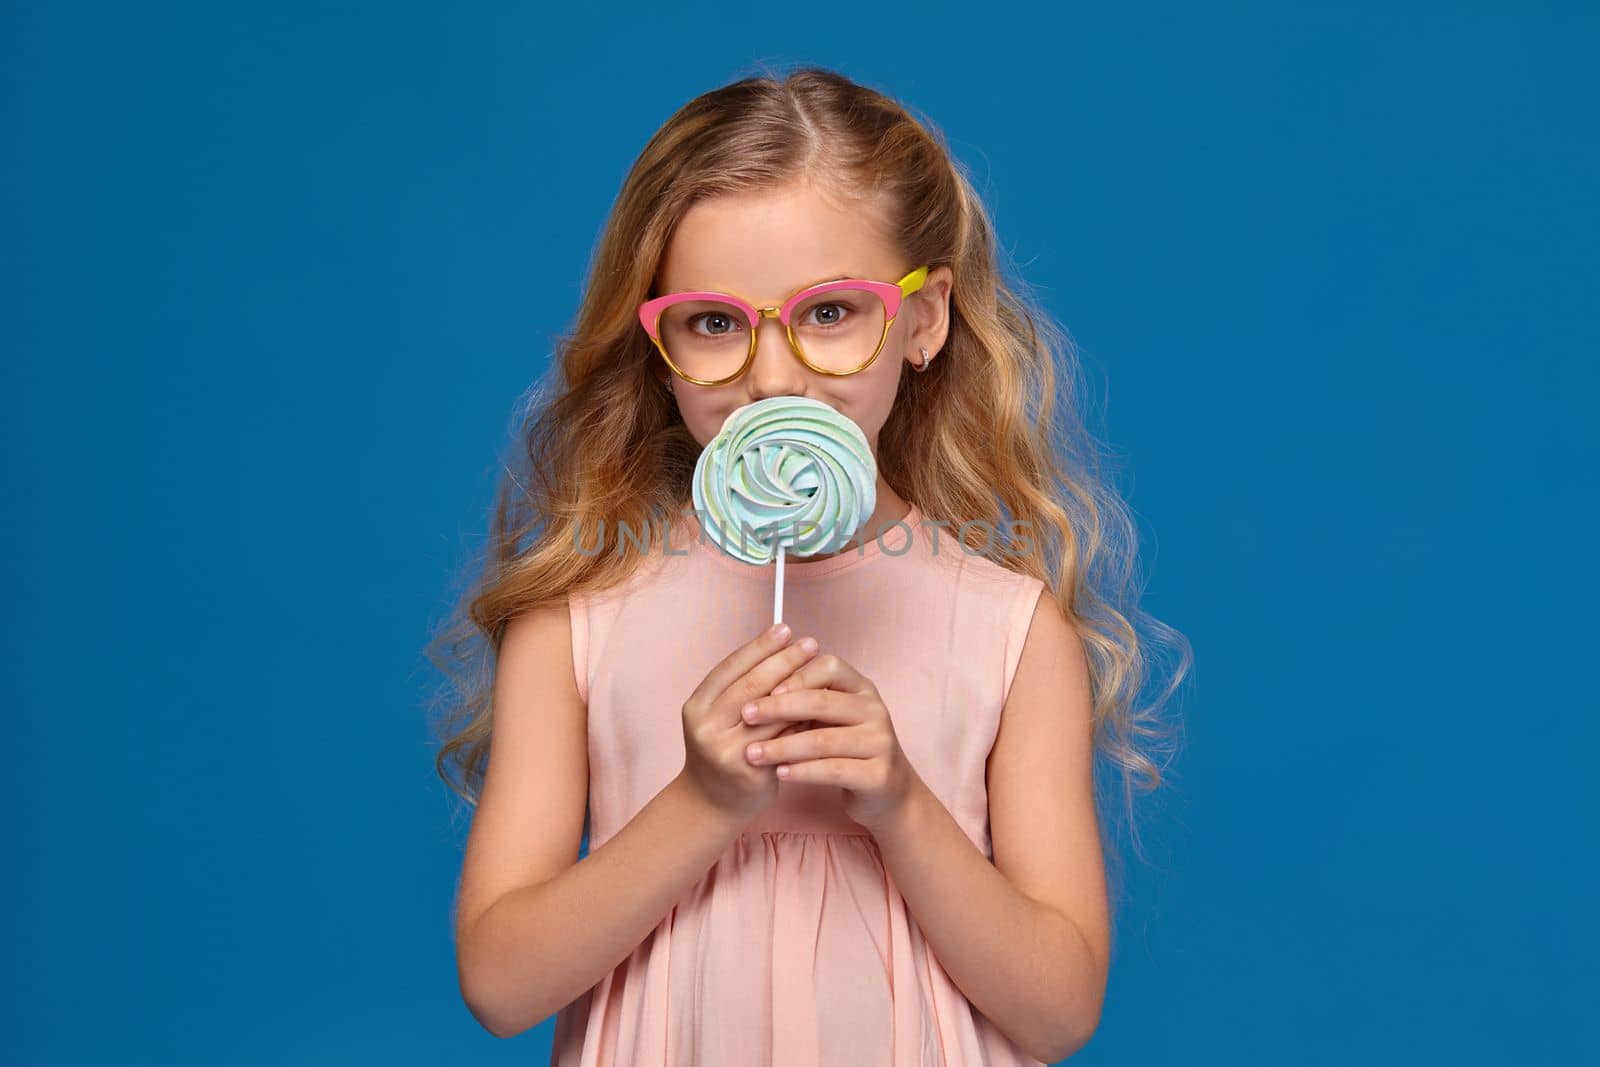 Modern little girl in a pink dress and a fashionable glasses is holding a candy, standing on a blue background.